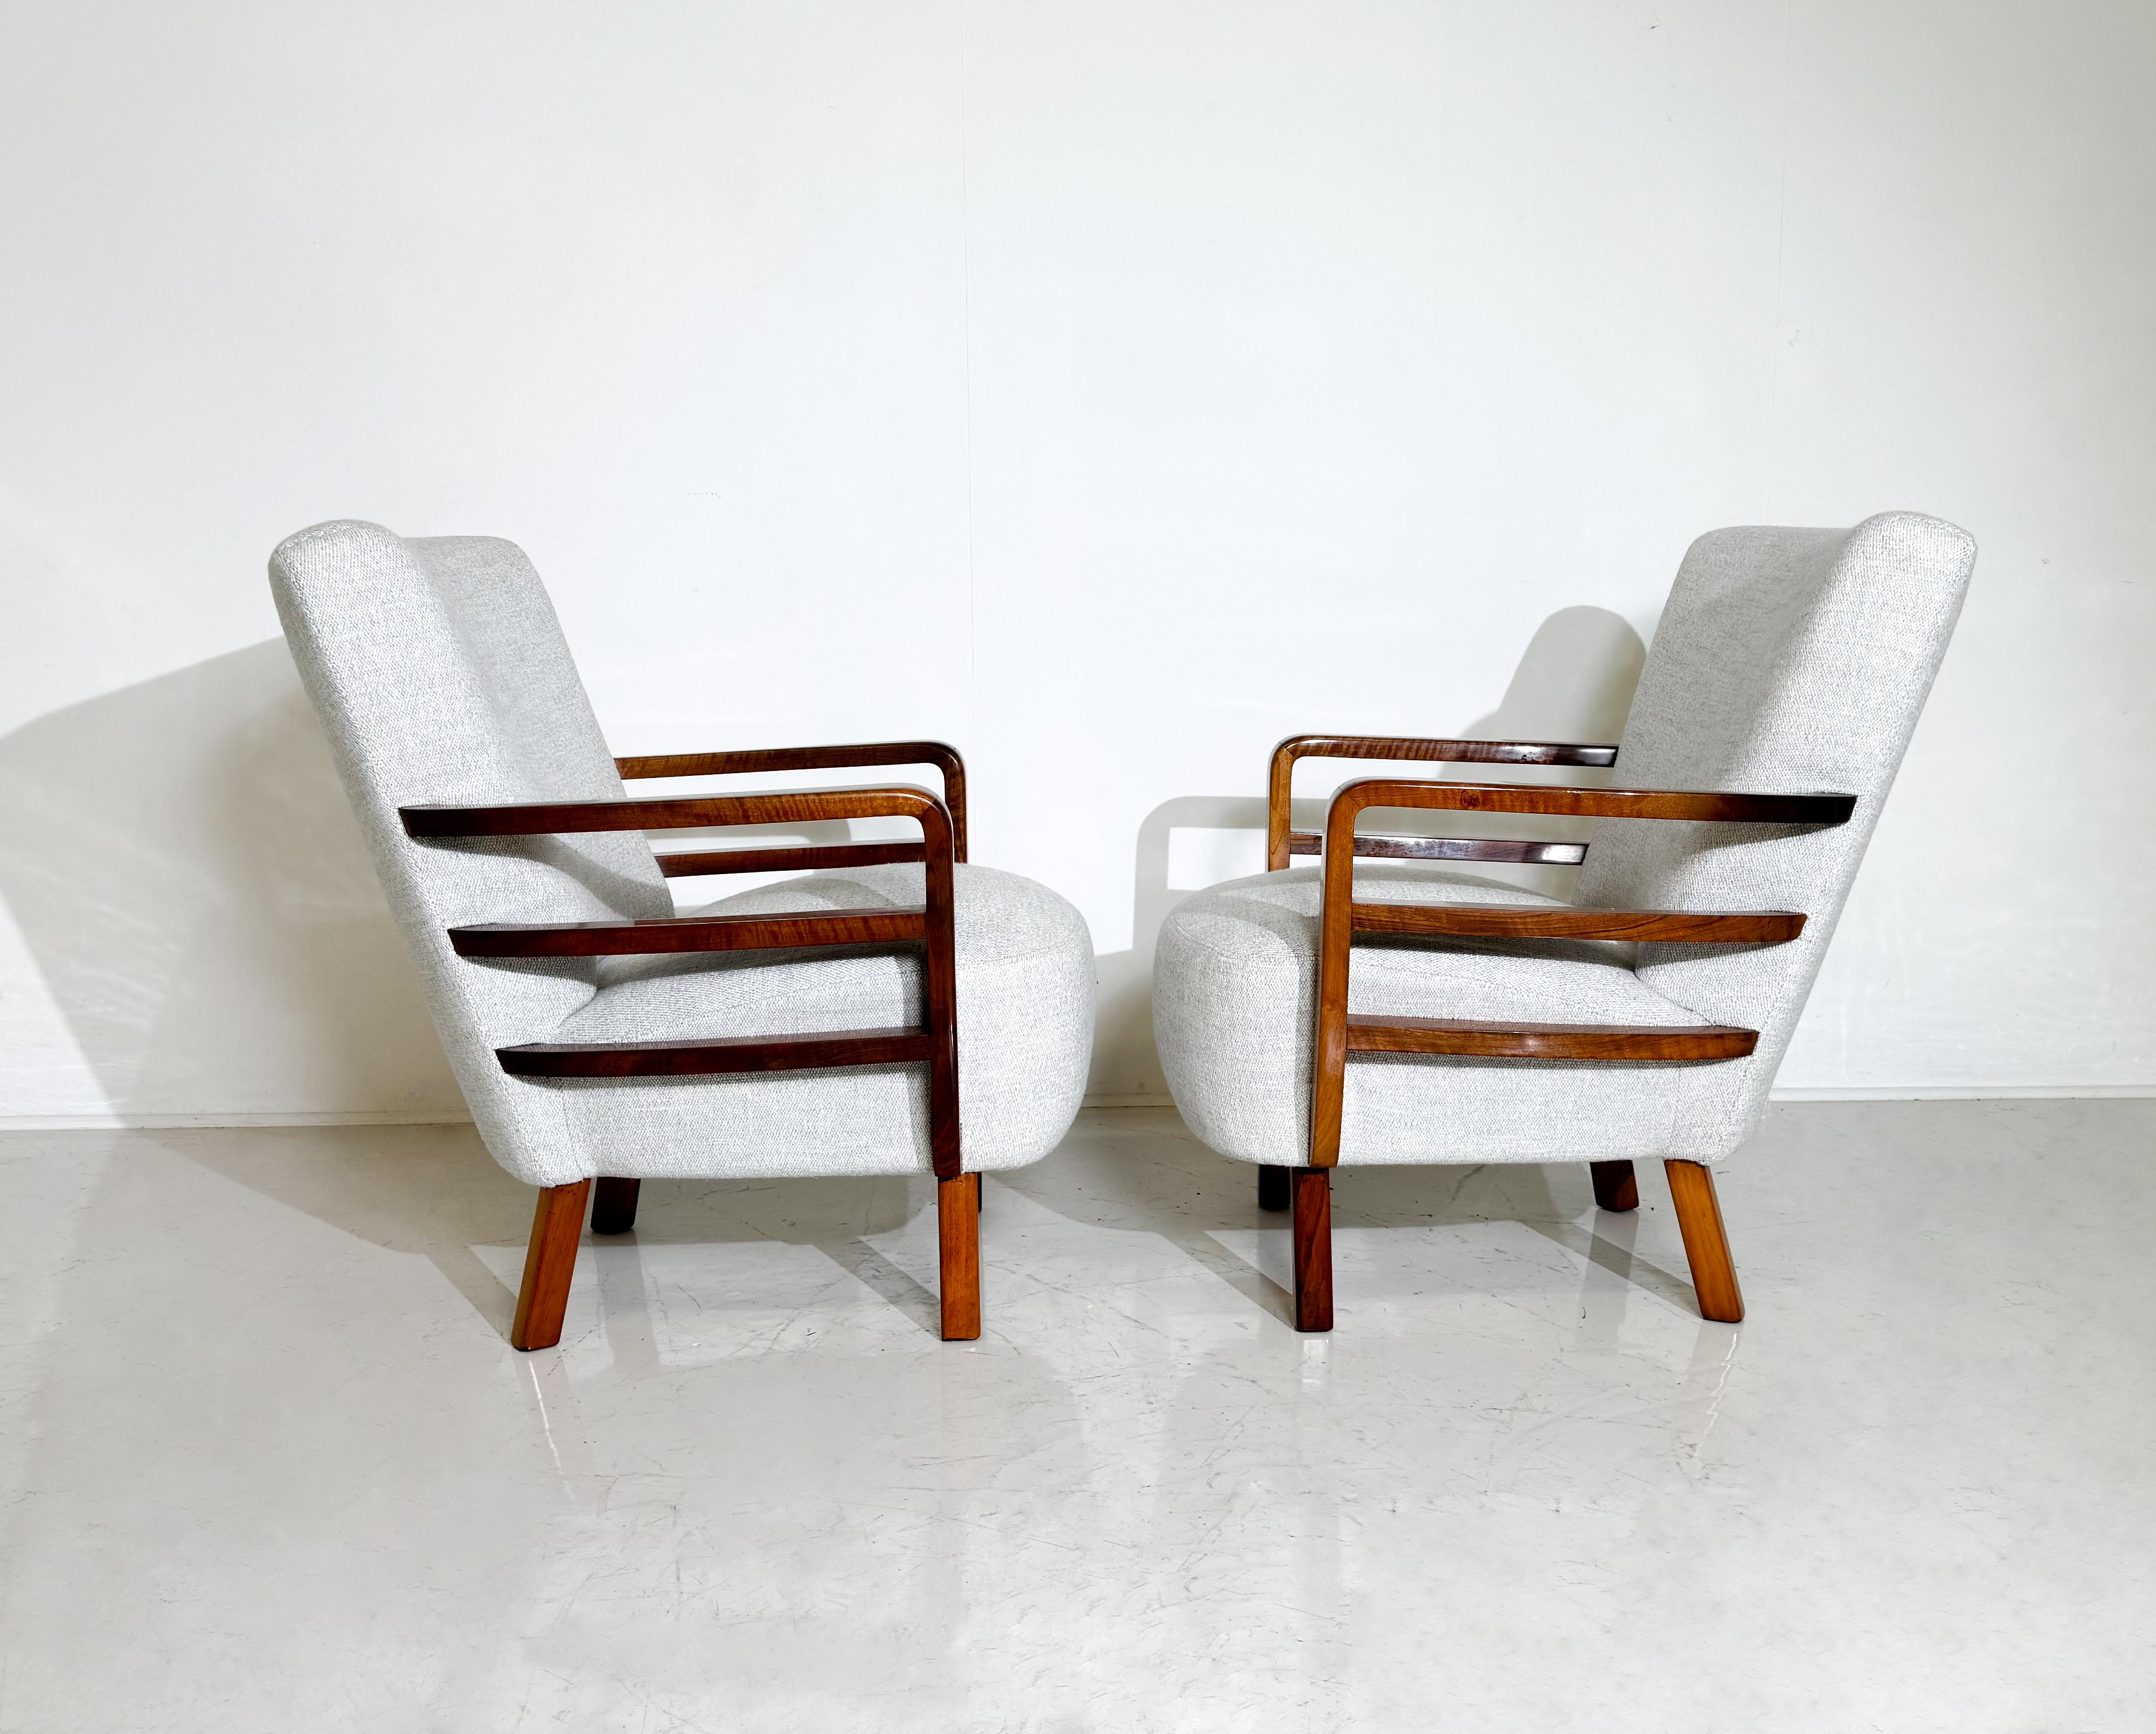 Fabric Pair of Art Deco Armchairs, Walnut, Hungary - New Upholstery For Sale